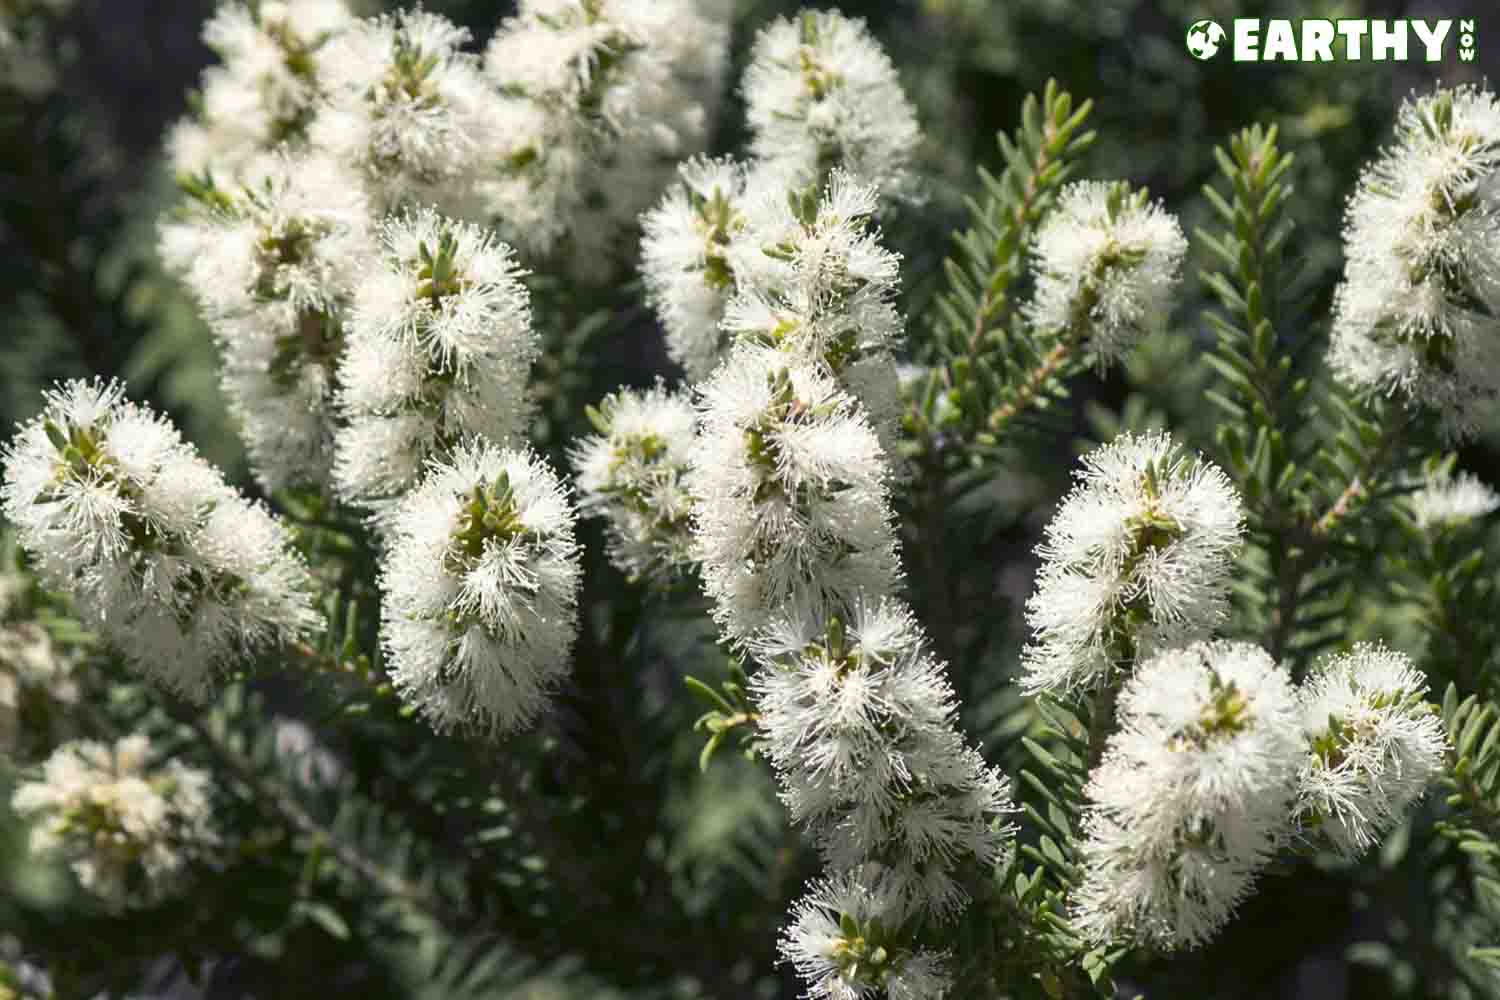 Nerolidol terpene is in the Tea Tree plant and cannabis